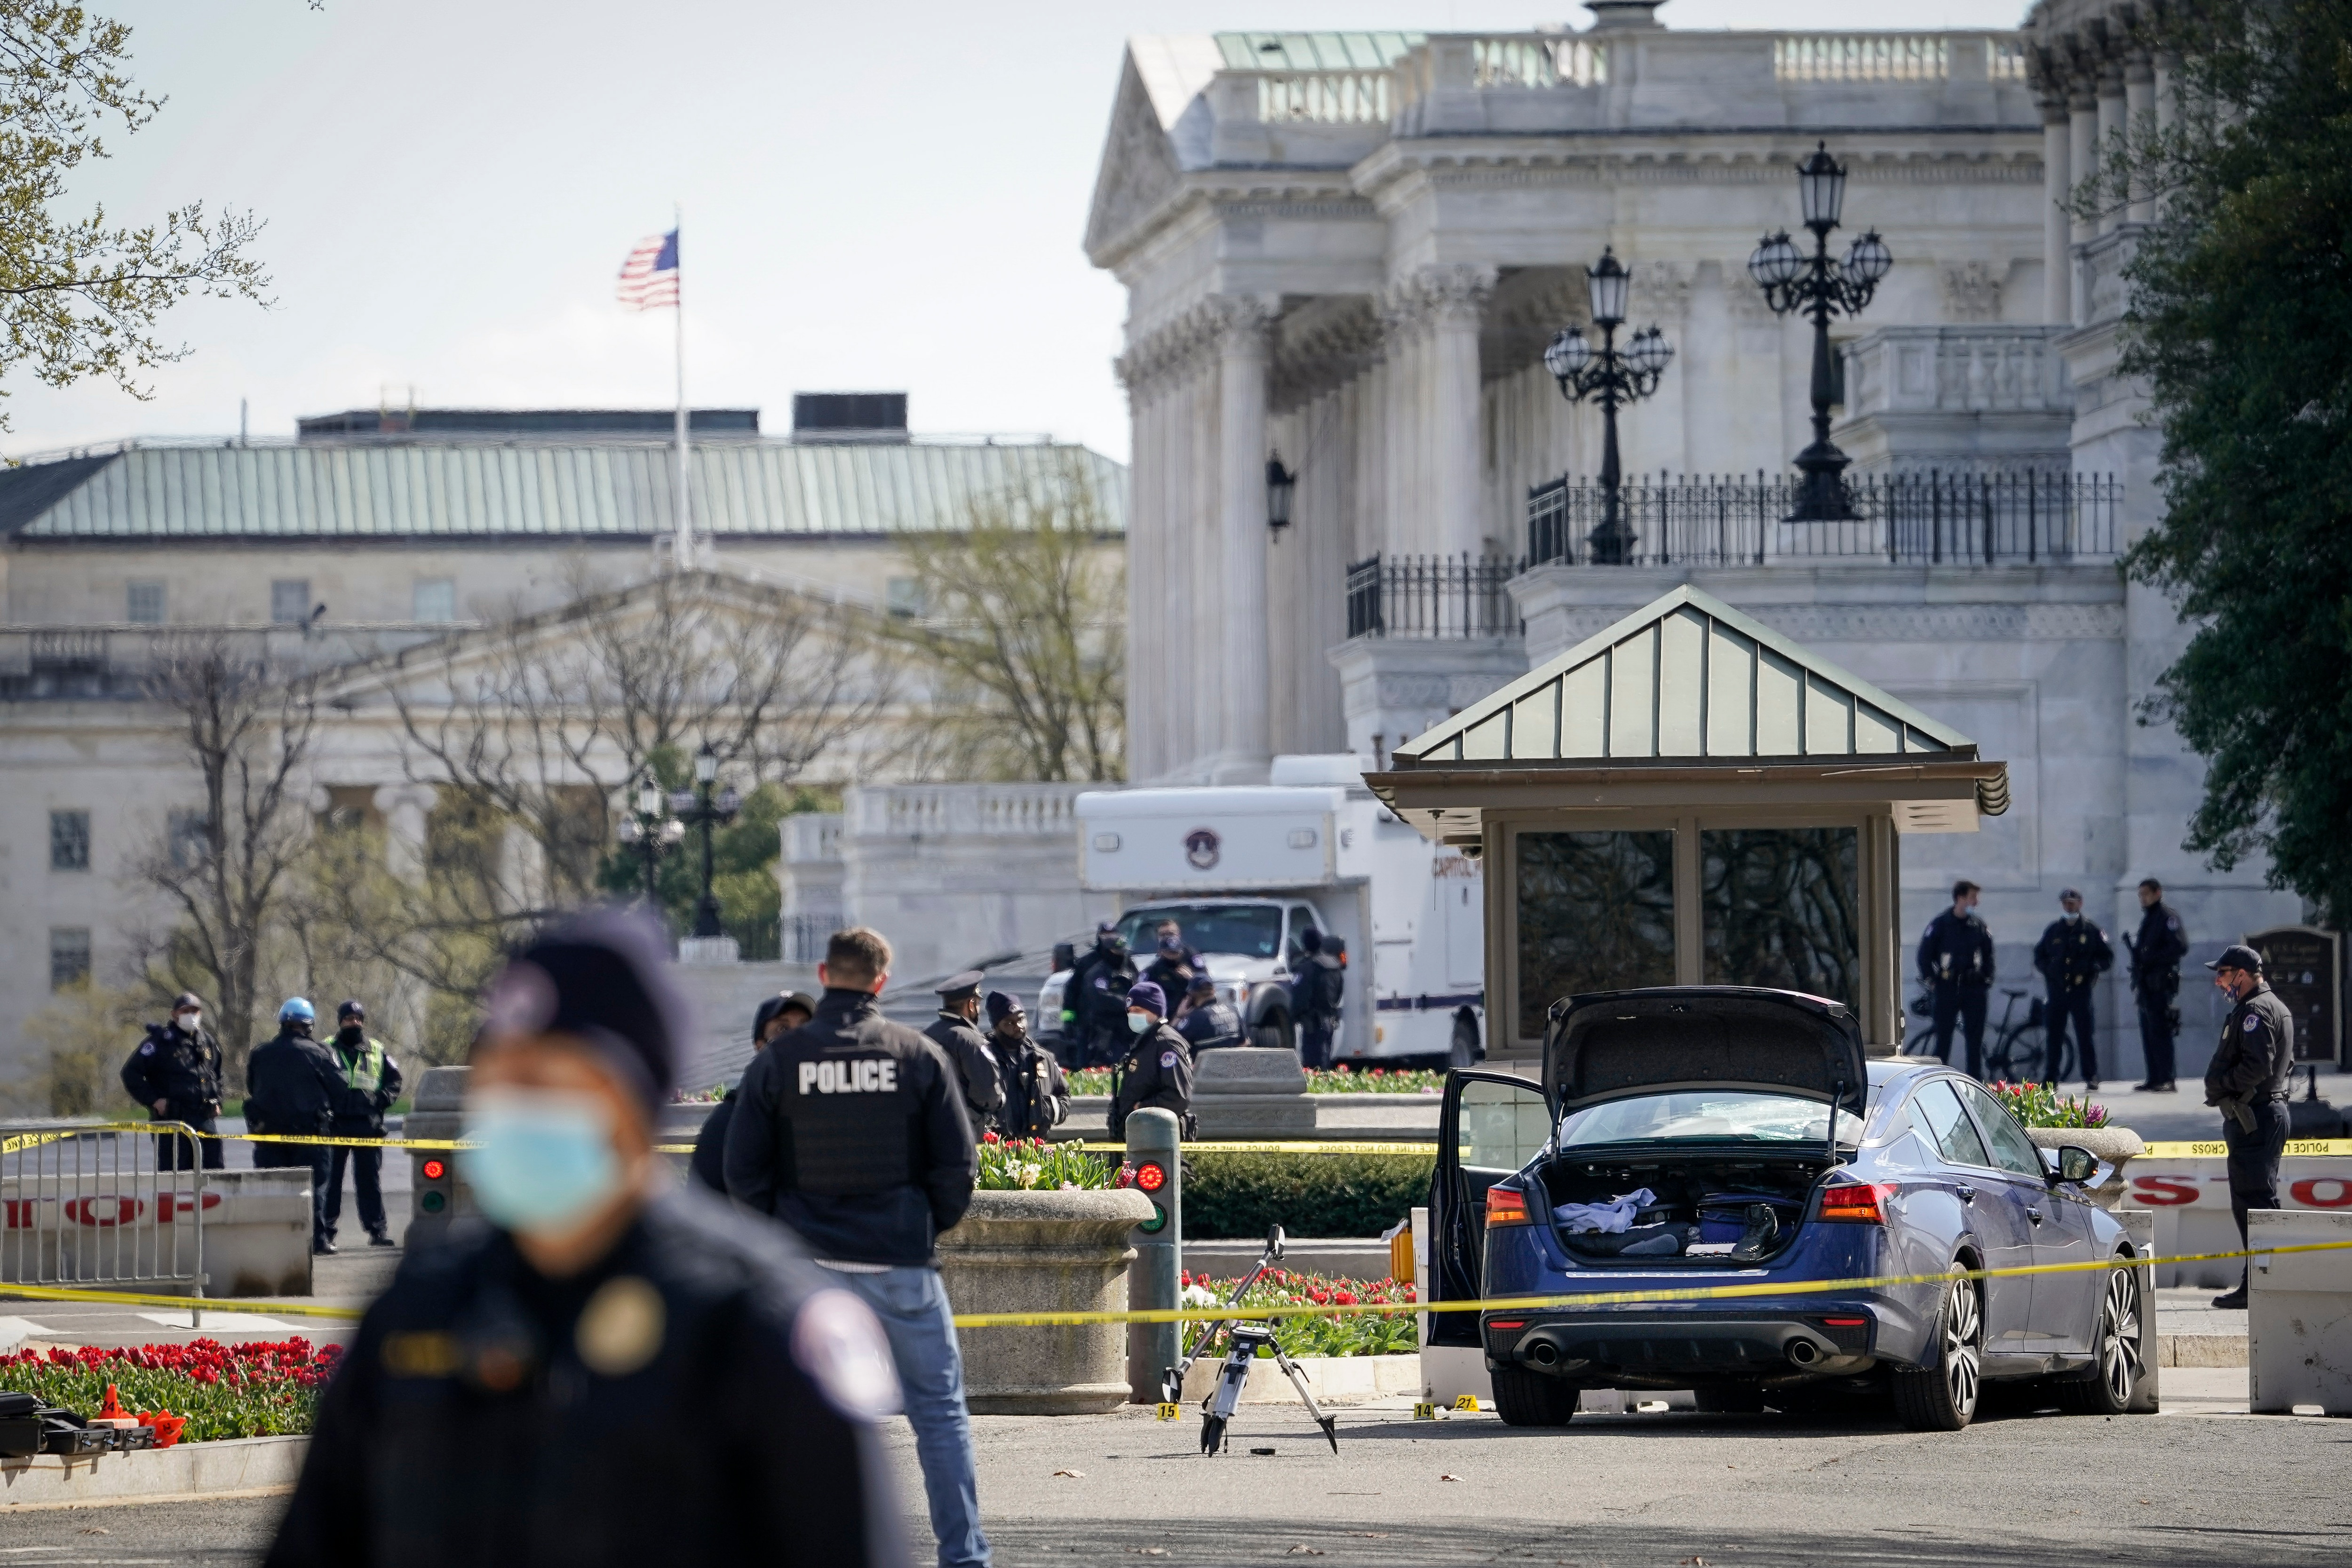 Police investigate the scene after a vehicle charged a barricade at the US Capitol on 2 April in Washington, DC. 